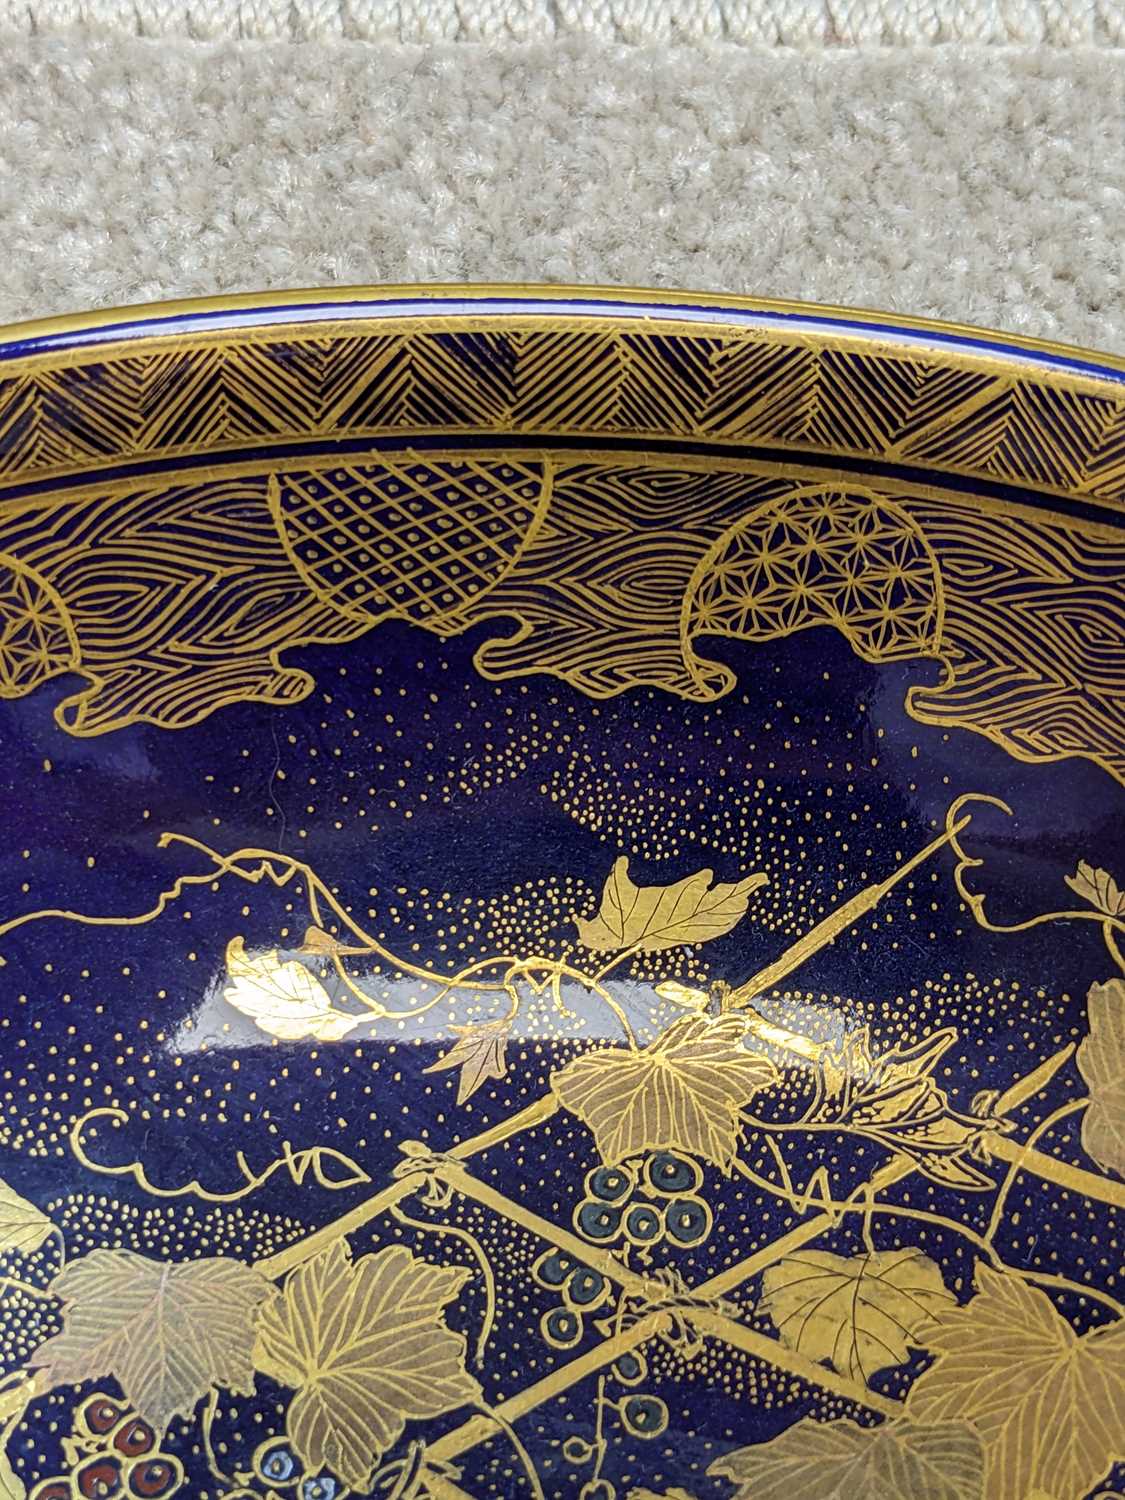 JAPANESE SATSUMA BOWL, Meiji Period, decorated in gilt with enamel highlights on a blue ground - Image 3 of 5